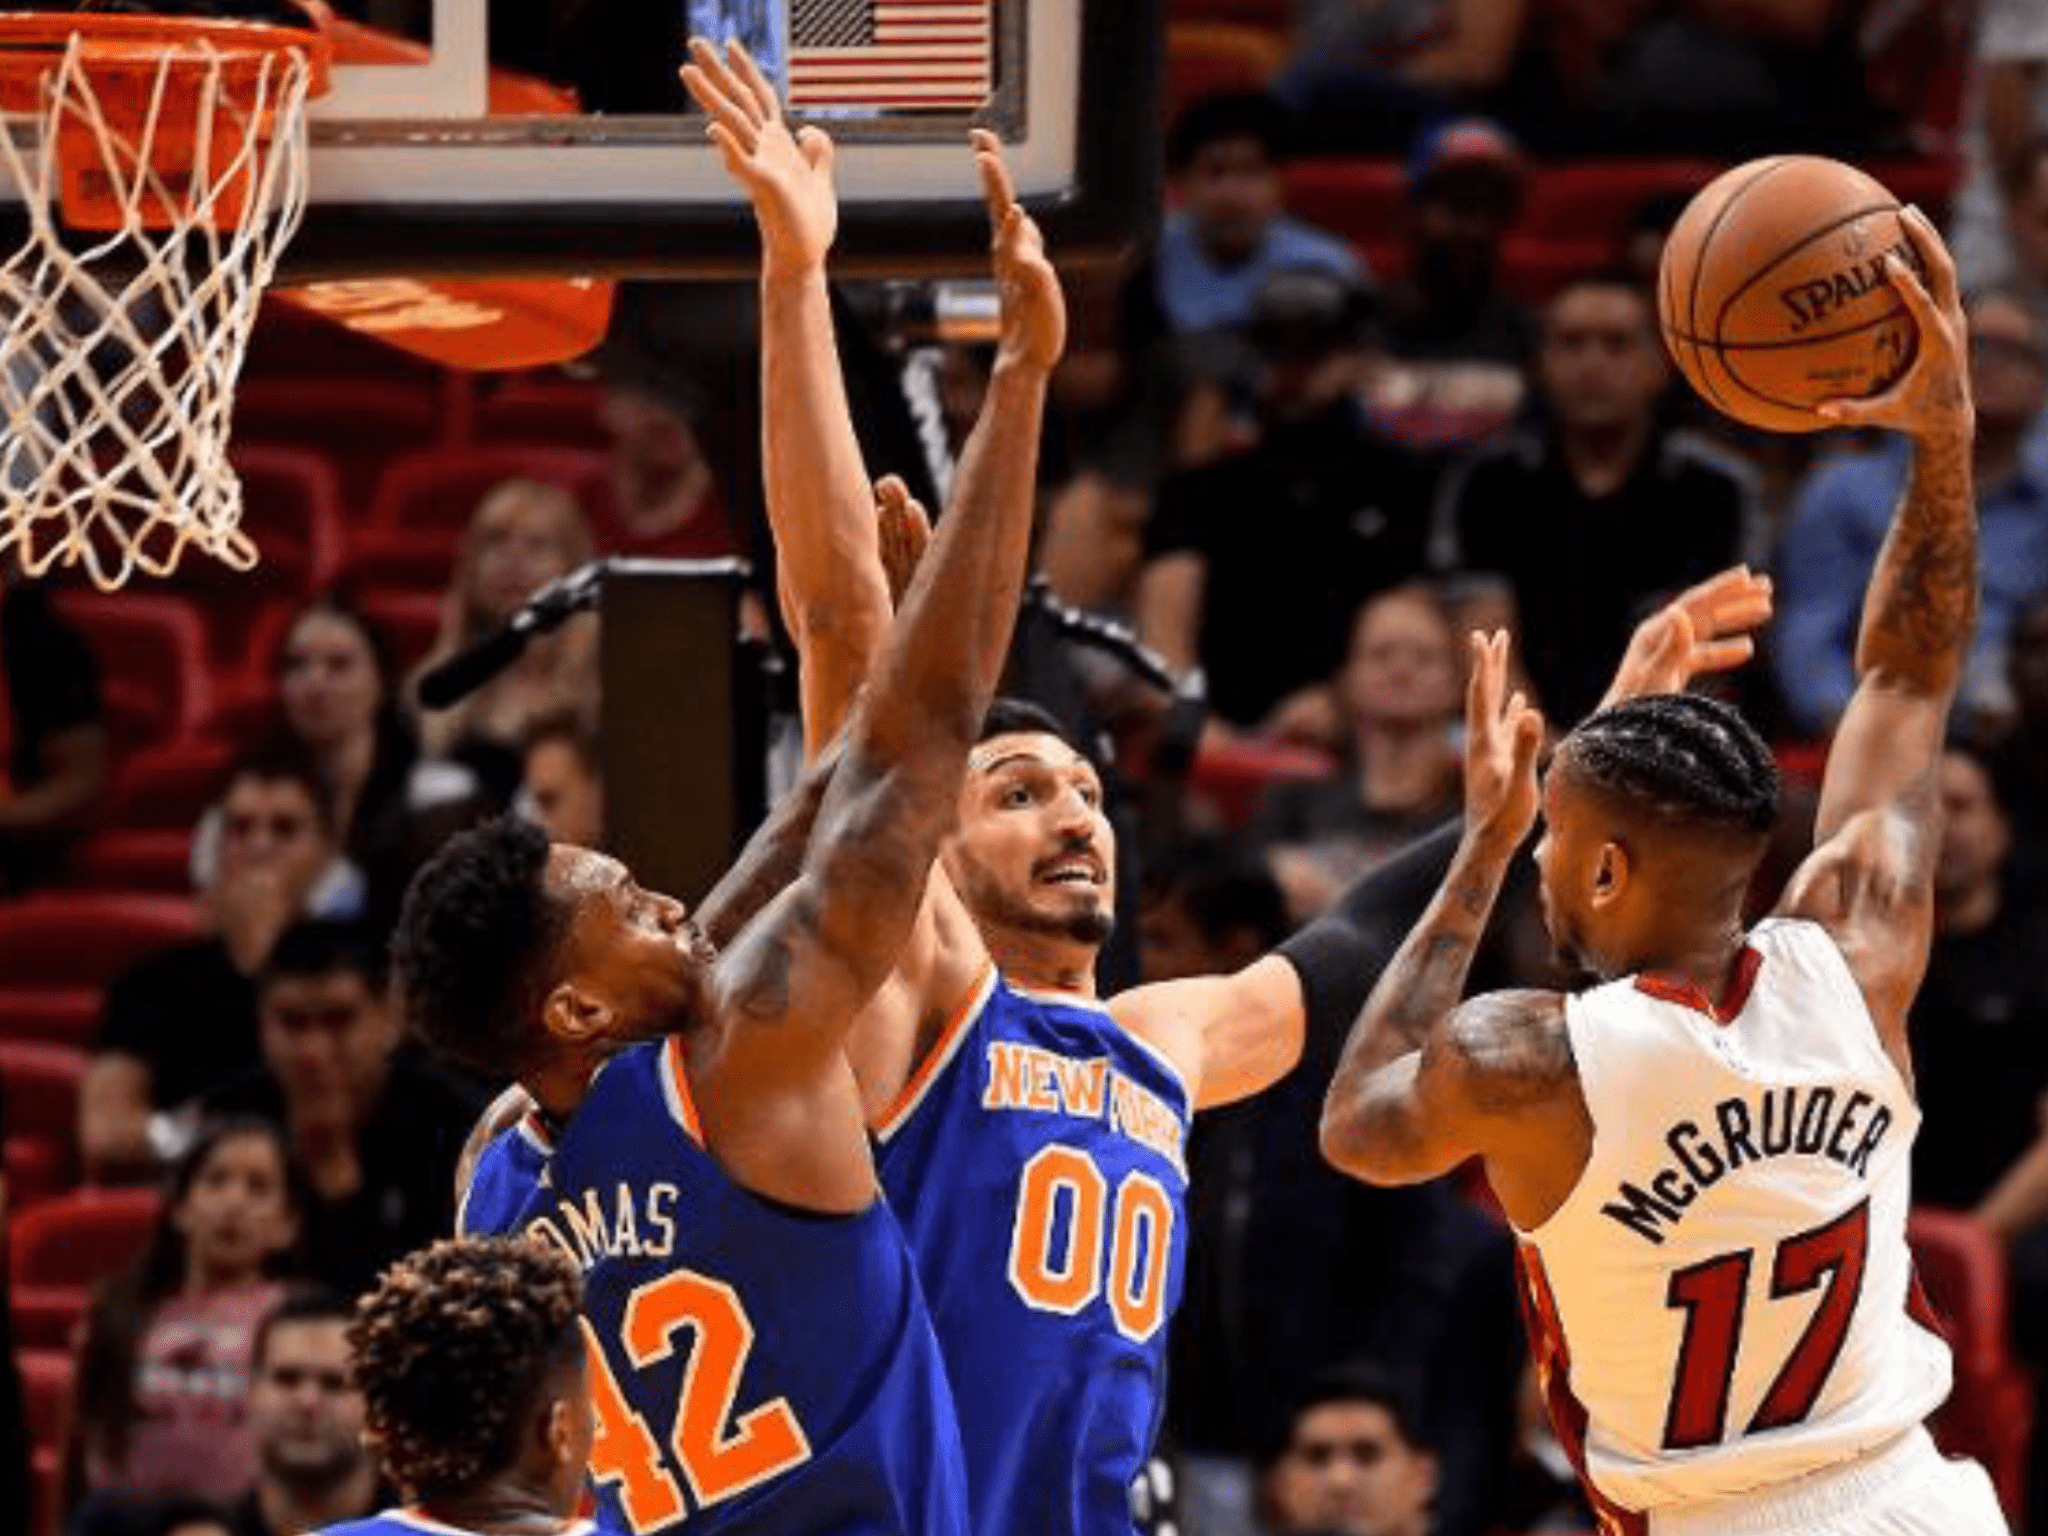 Line-up Changes In Order: Heat Take Down Knicks